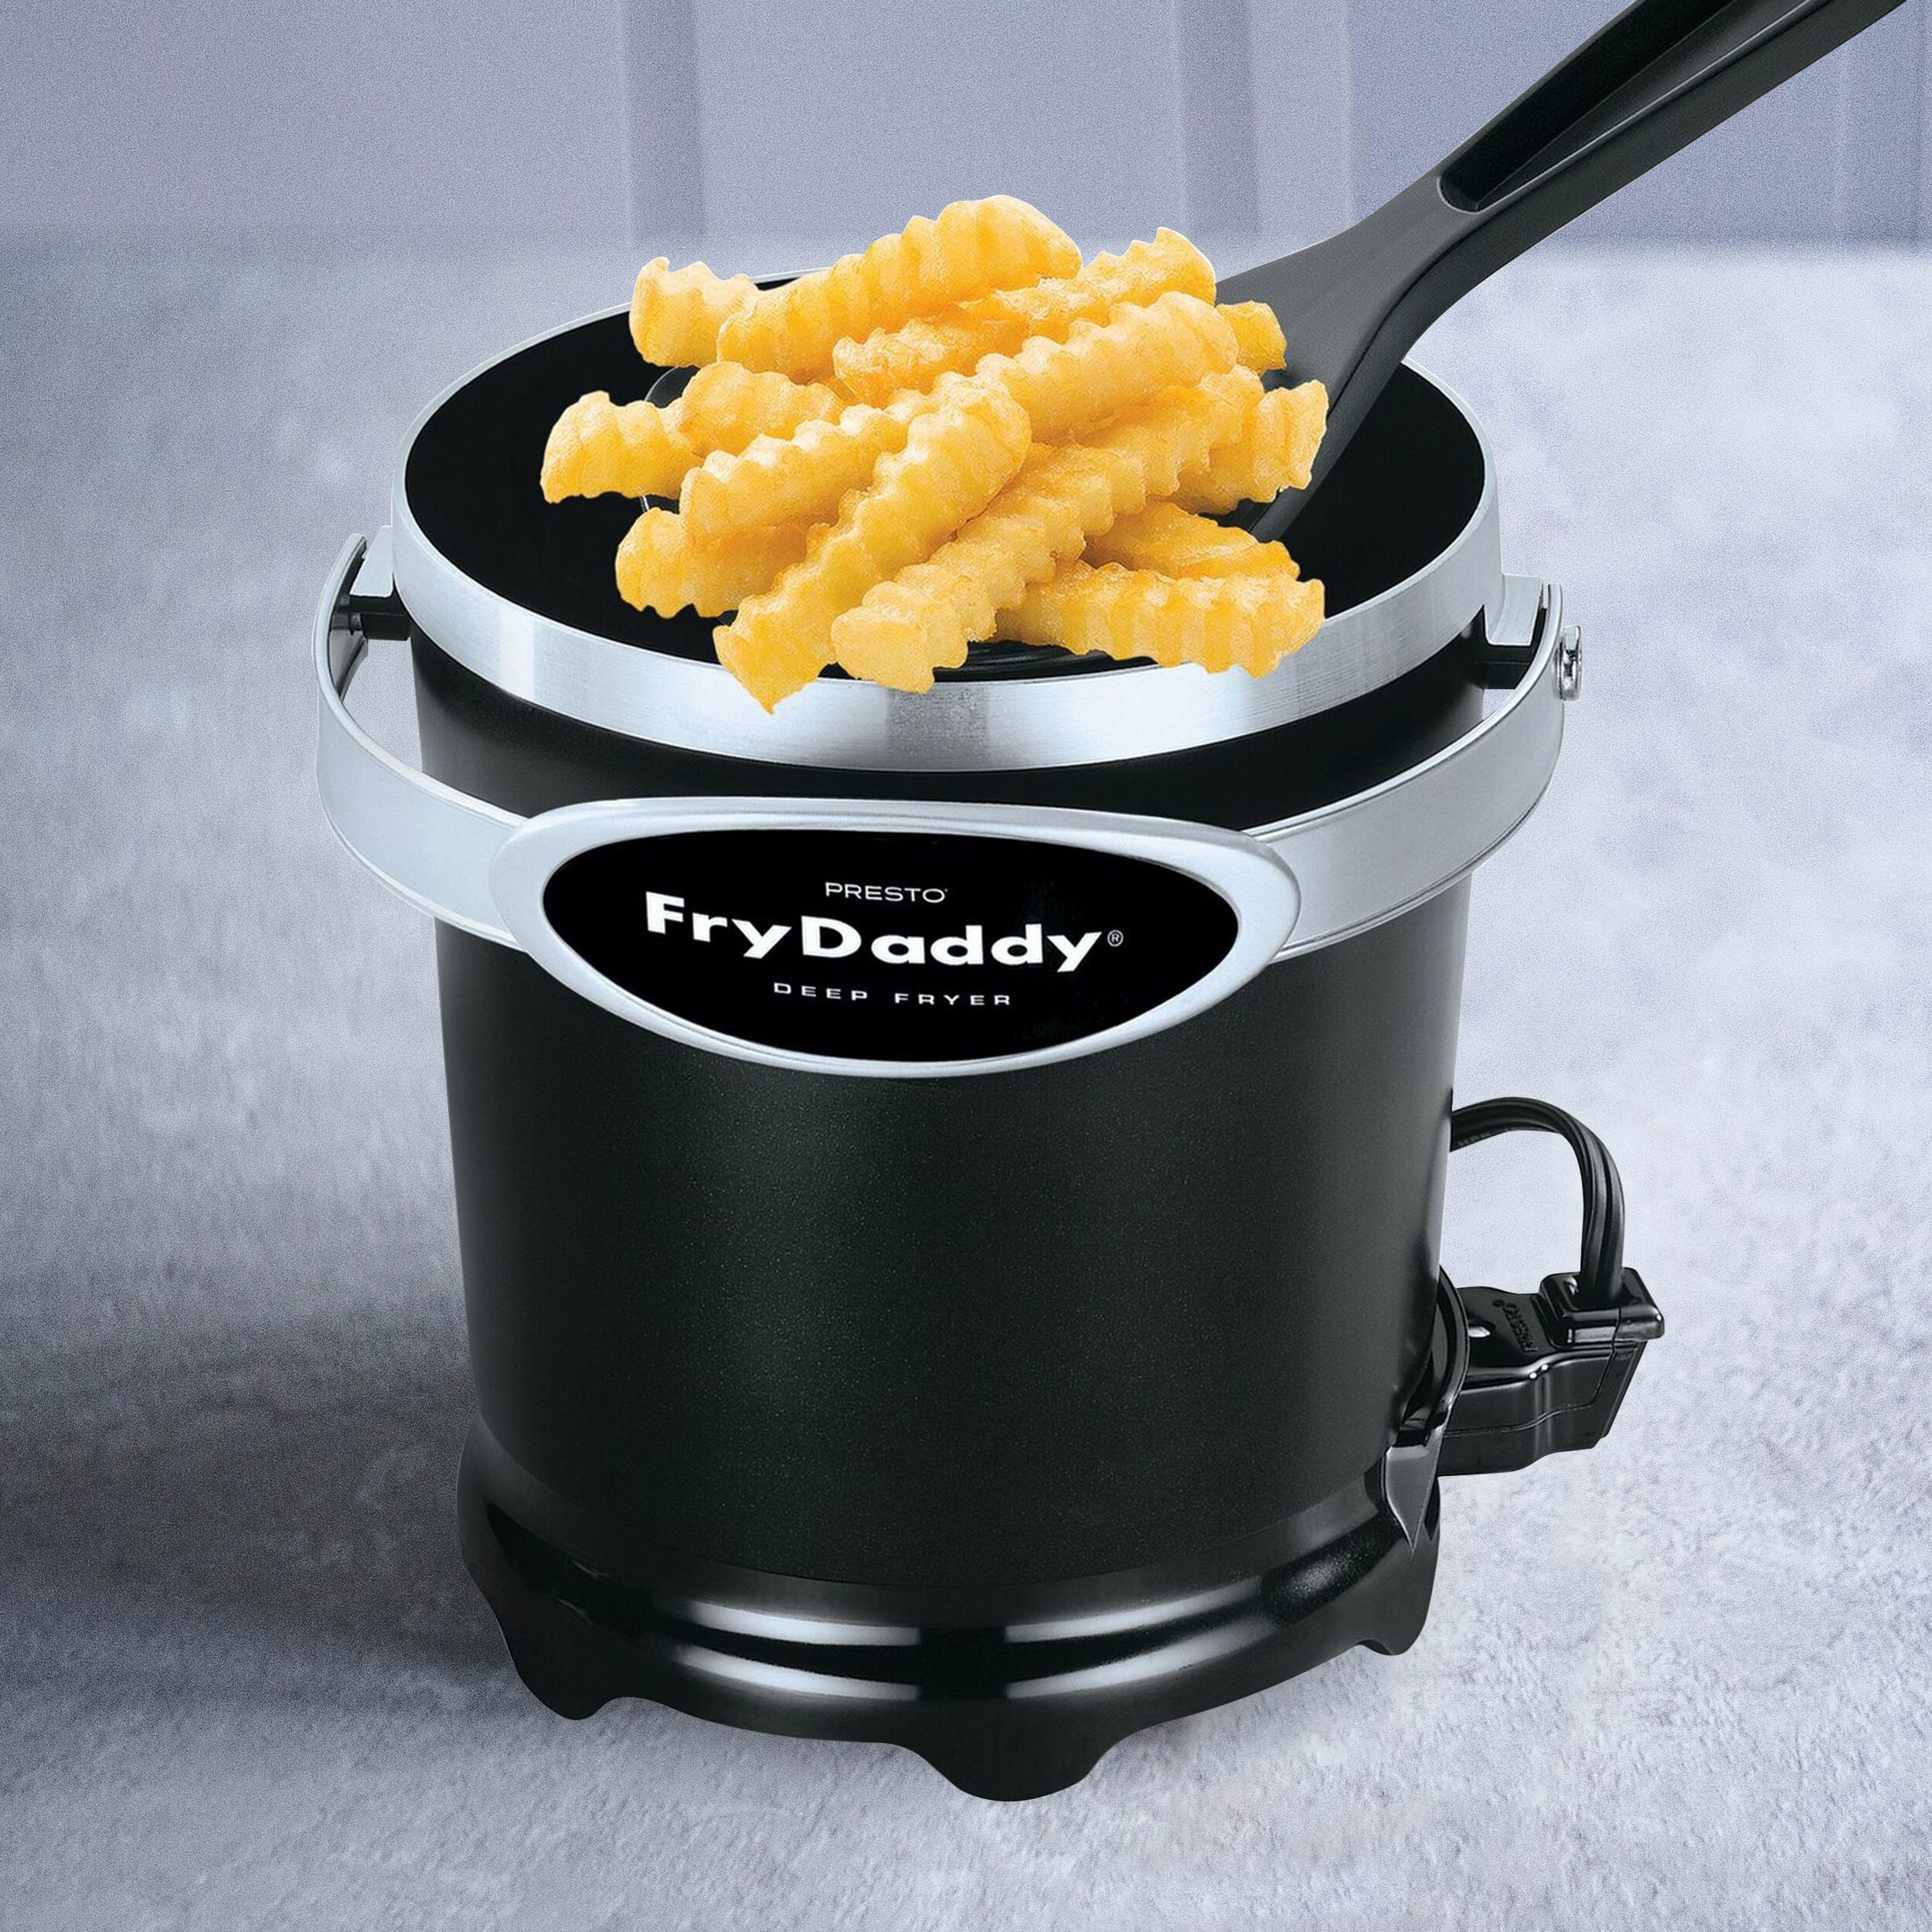 Comft Deep Fryer Commercial Fry Daddy with Basket, Stainless Steel Electric  Countertop Large Capacity Kitchen Frying Machine for Turkey, French Fries